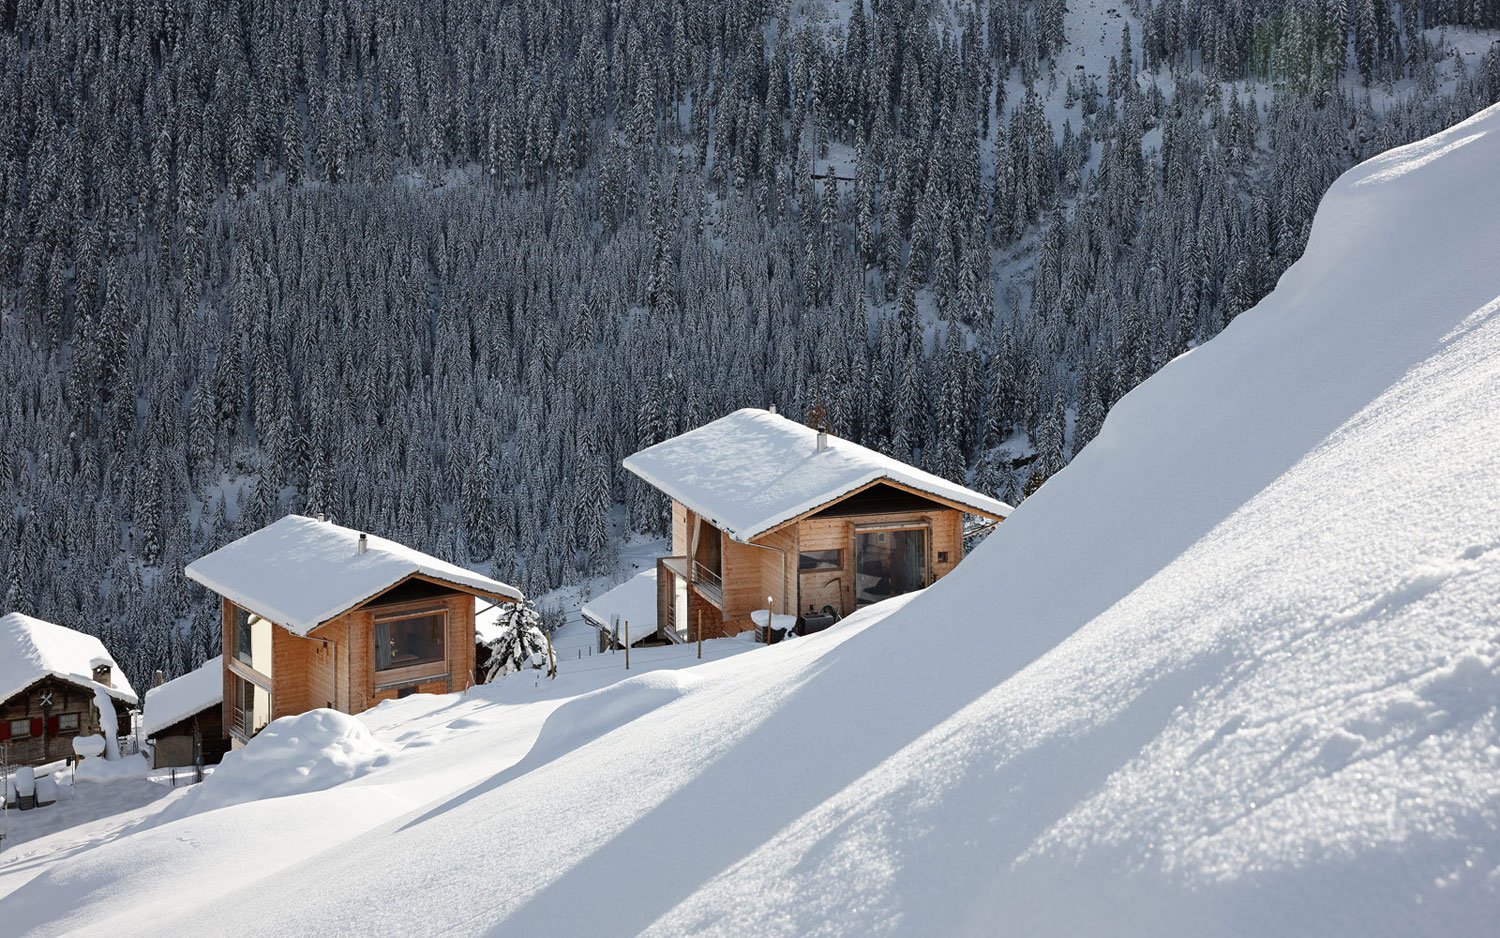 House Design Vacation Captivating House Design Of Zumthor Vacation Homes With Brown Colored Wall Made From Wooden Material And Snowy Wooden Roof House Designs  Simple Wooden Interior From Zumthor Vacation Home 